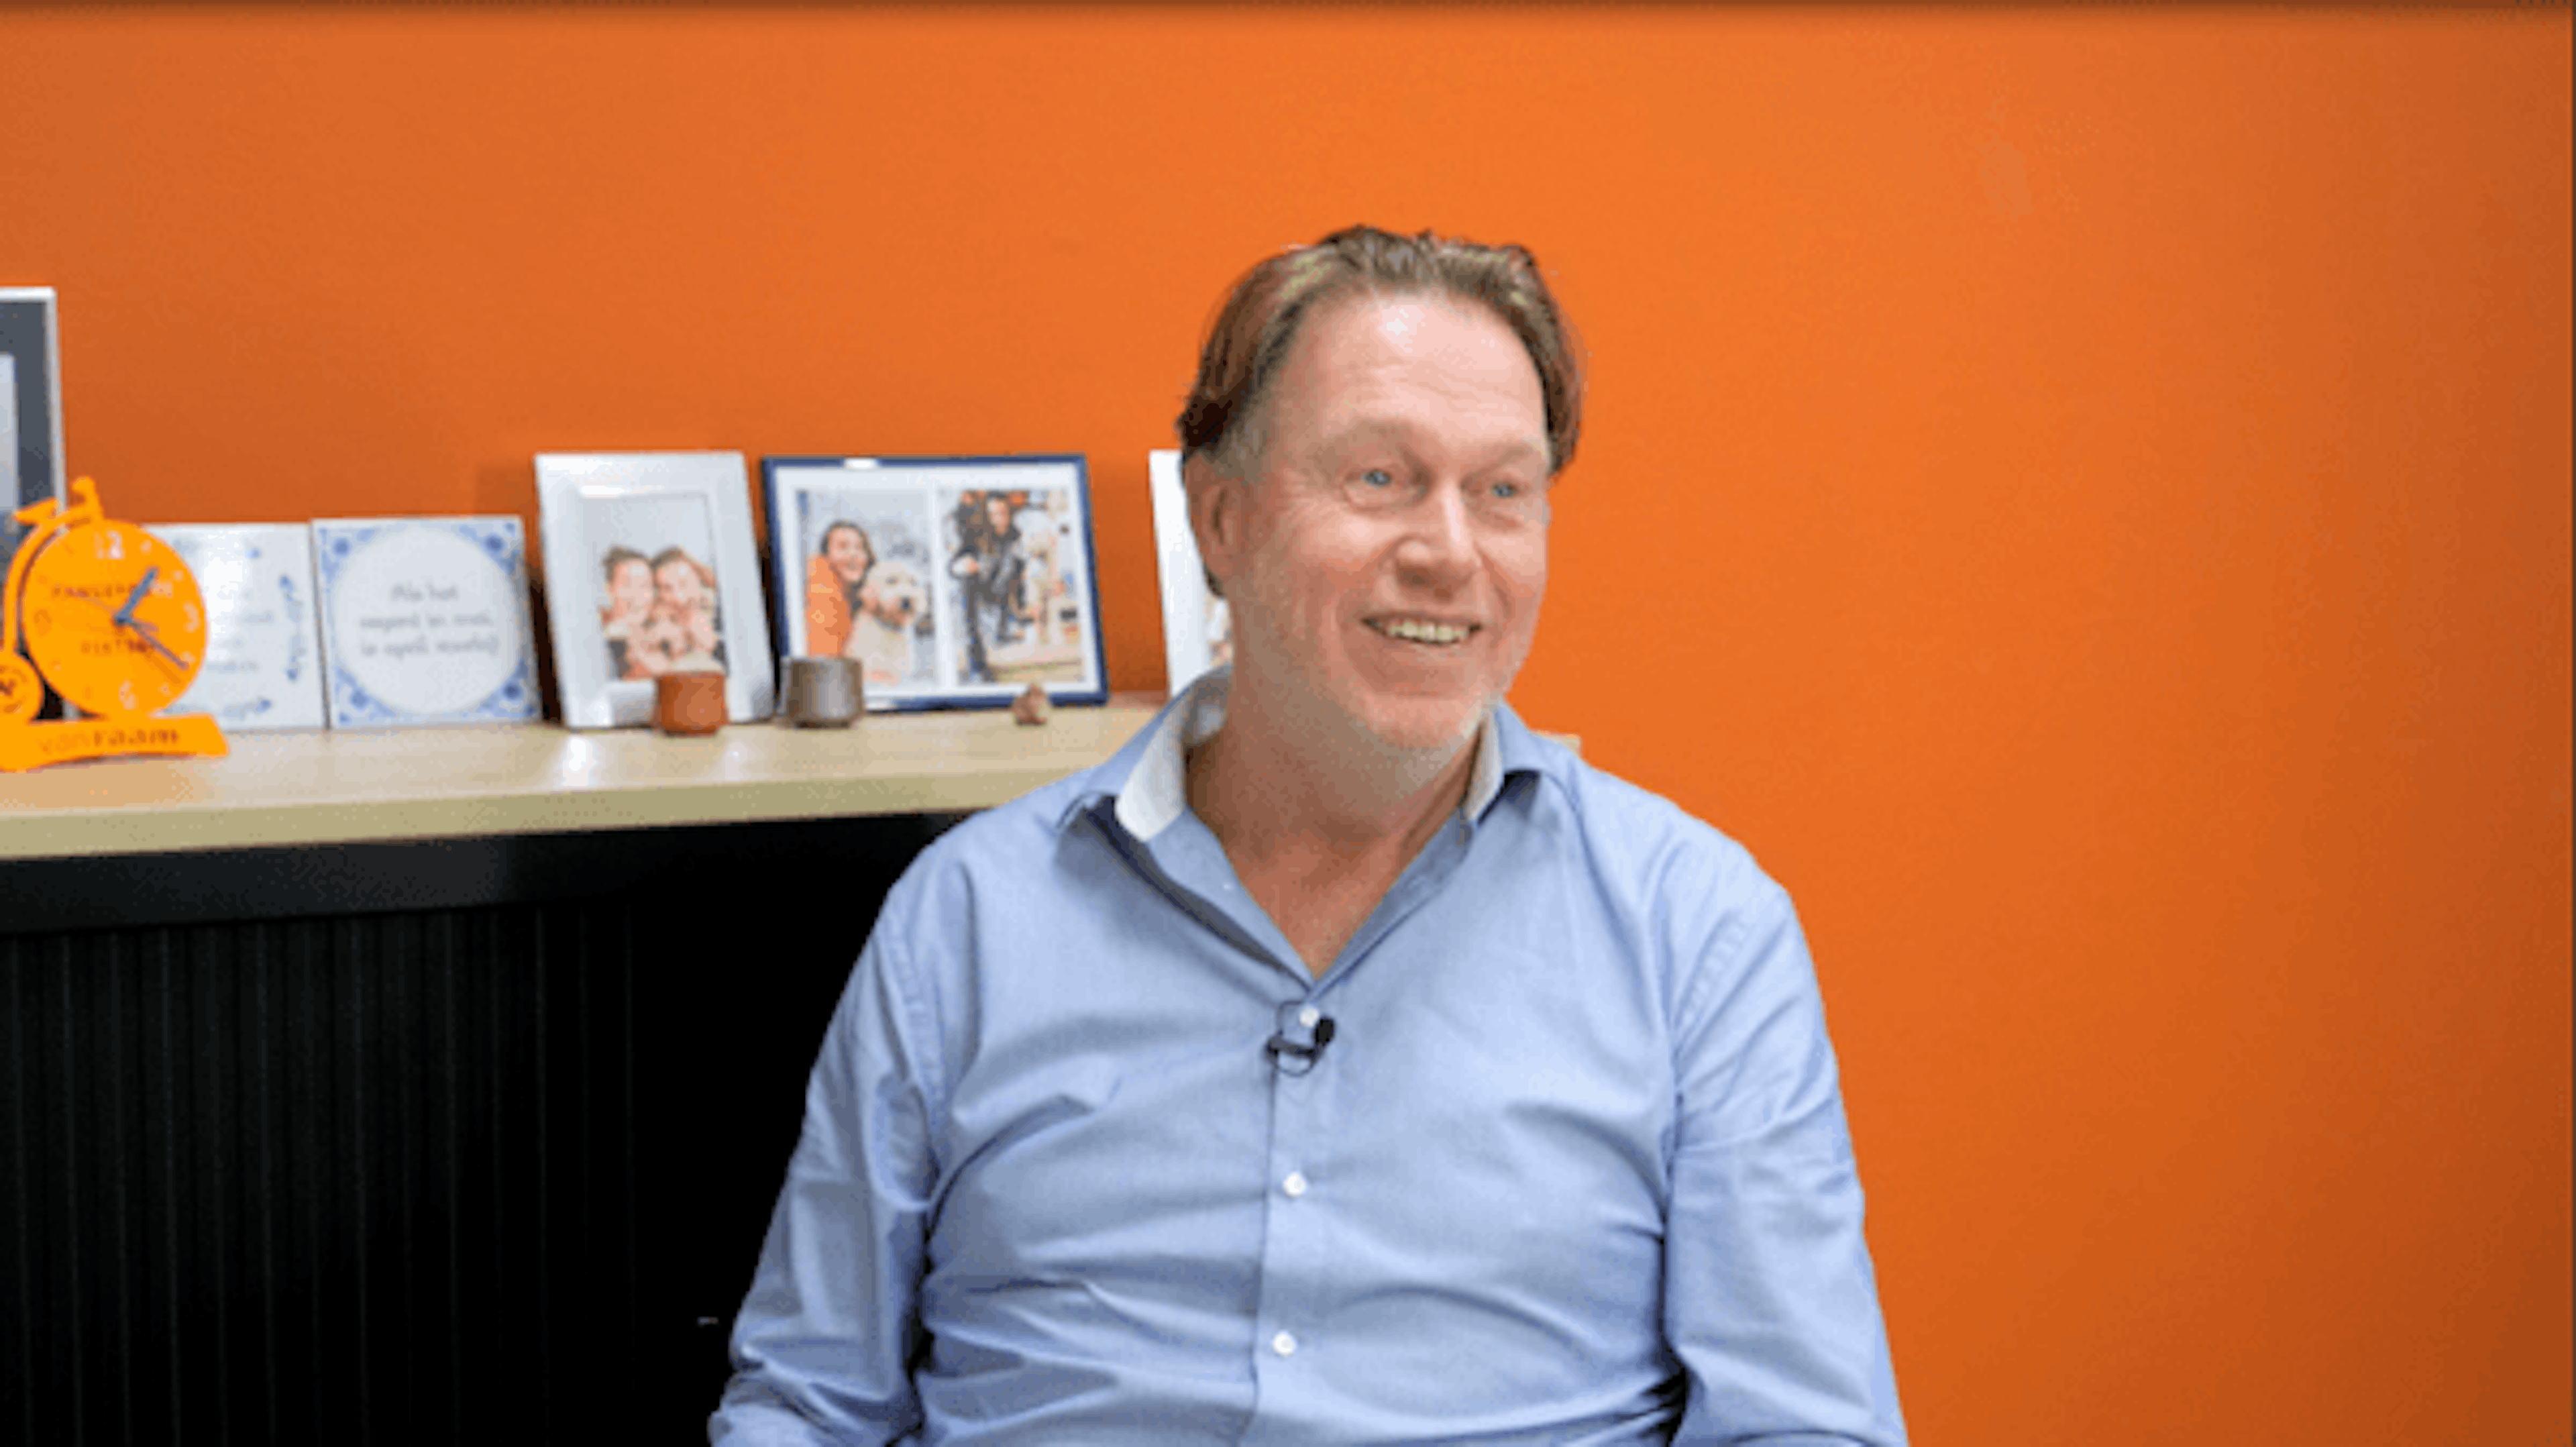 5 Questions to the Sales and Marketing Manager at Van Raam Video